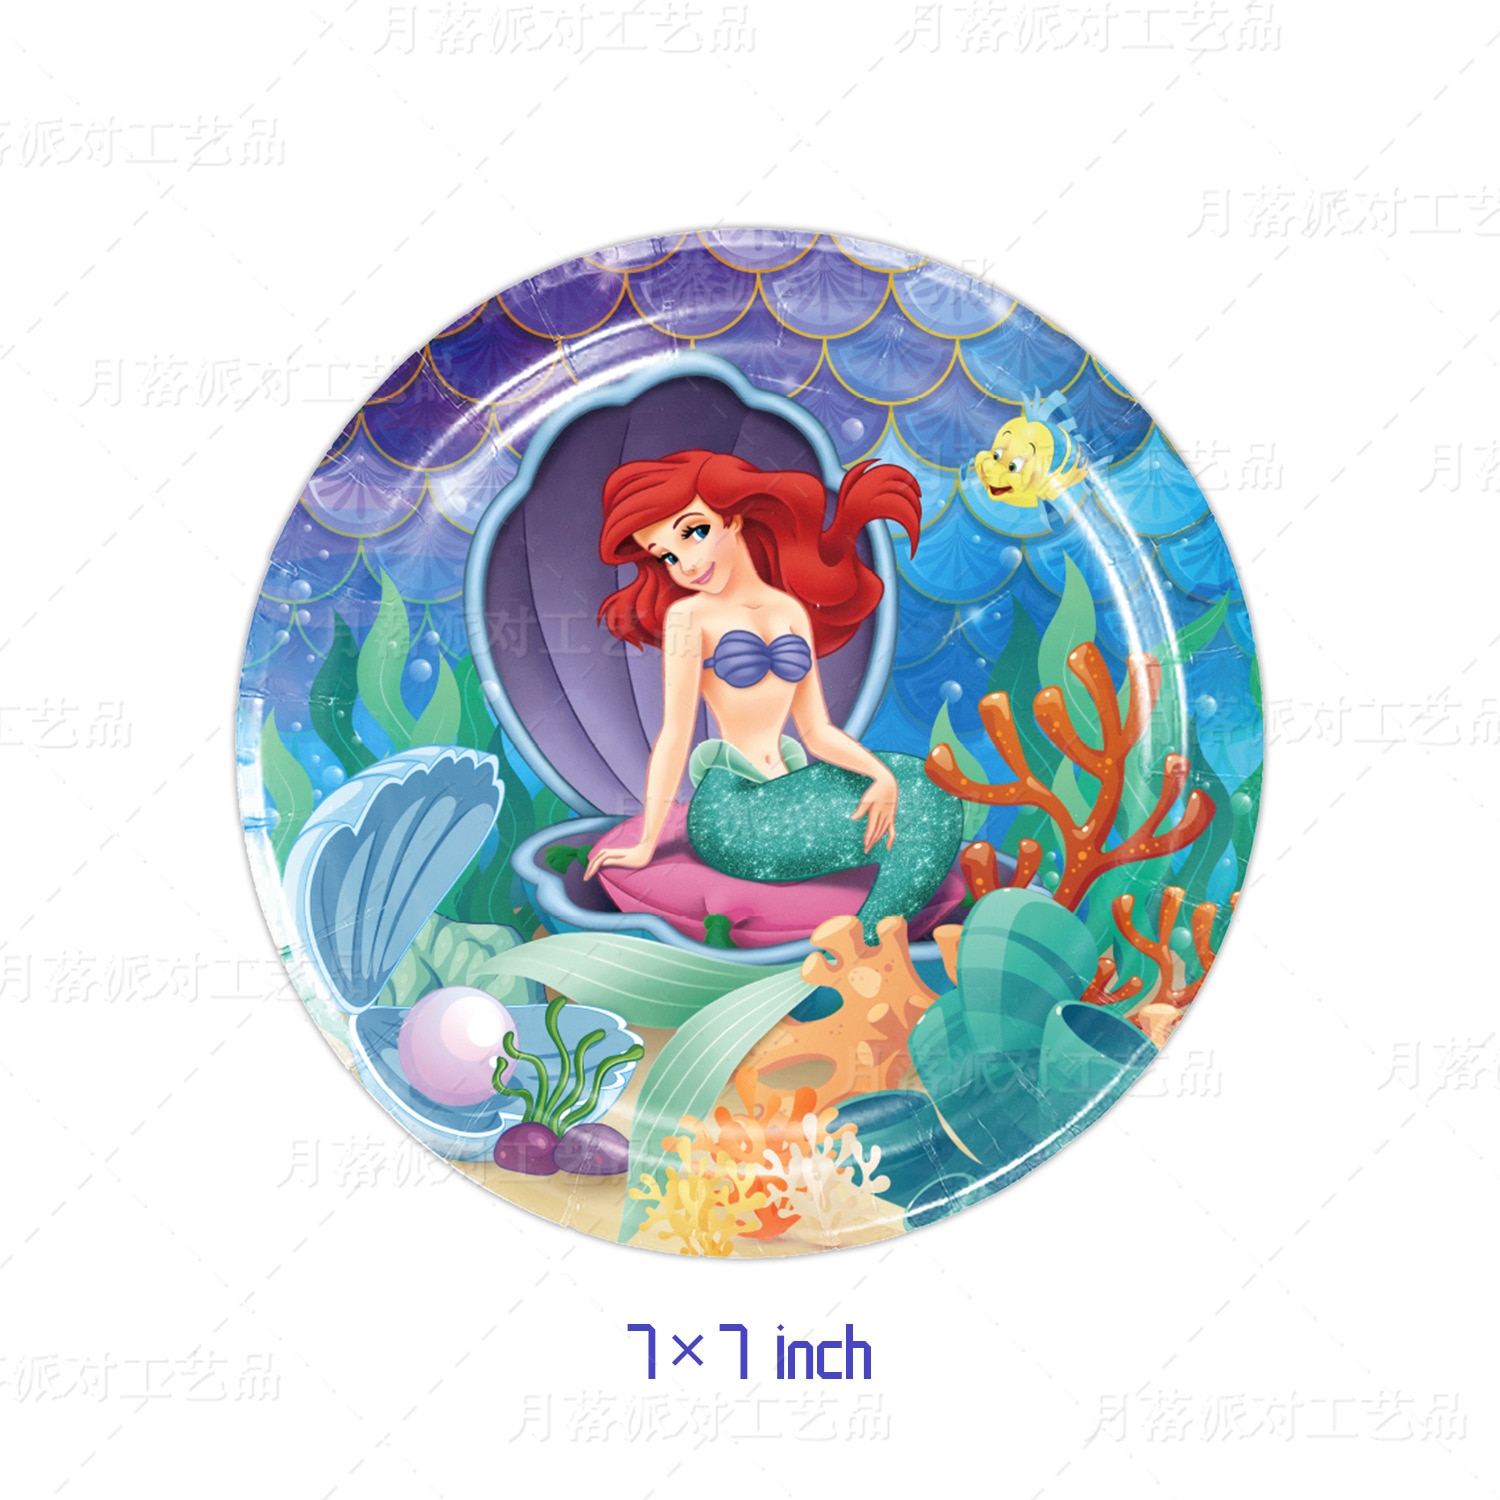 New style Little Mermaid Ariel Theme Girl Birthday Party Paper Plate Napkin Tablecloth Disposable Tableware Kids 4 - Ariel Doll